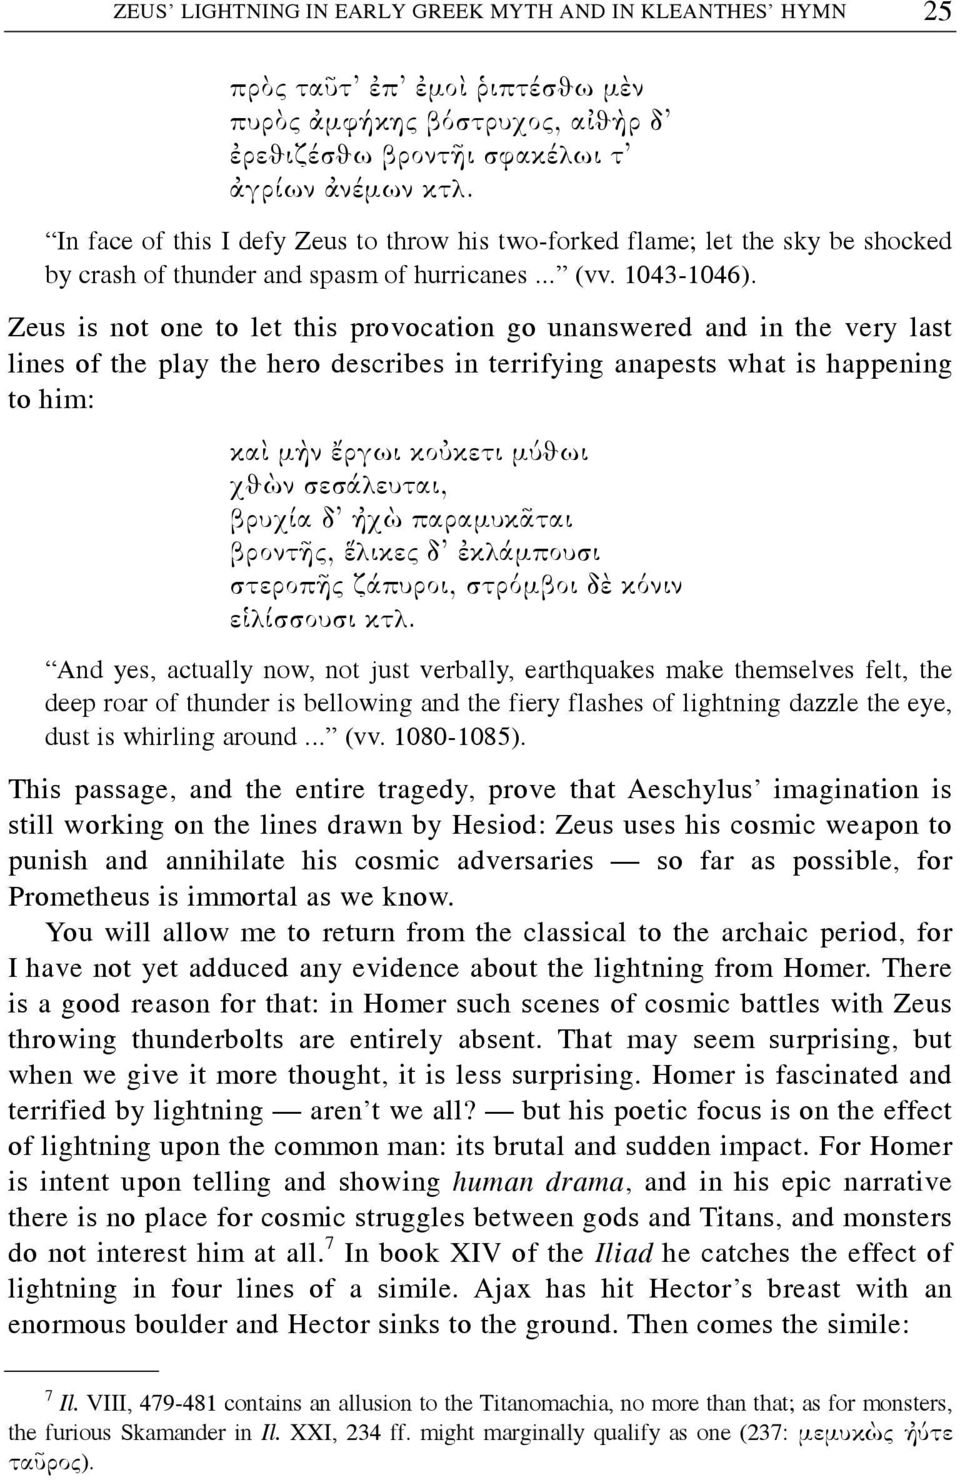 Zeus is not one to let this provocation go unanswered and in the very last lines of the play the hero describes in terrifying anapests what is happening to him: καὶ μὴν ἔργωι κοὐκετι μύϑωι χϑὼν